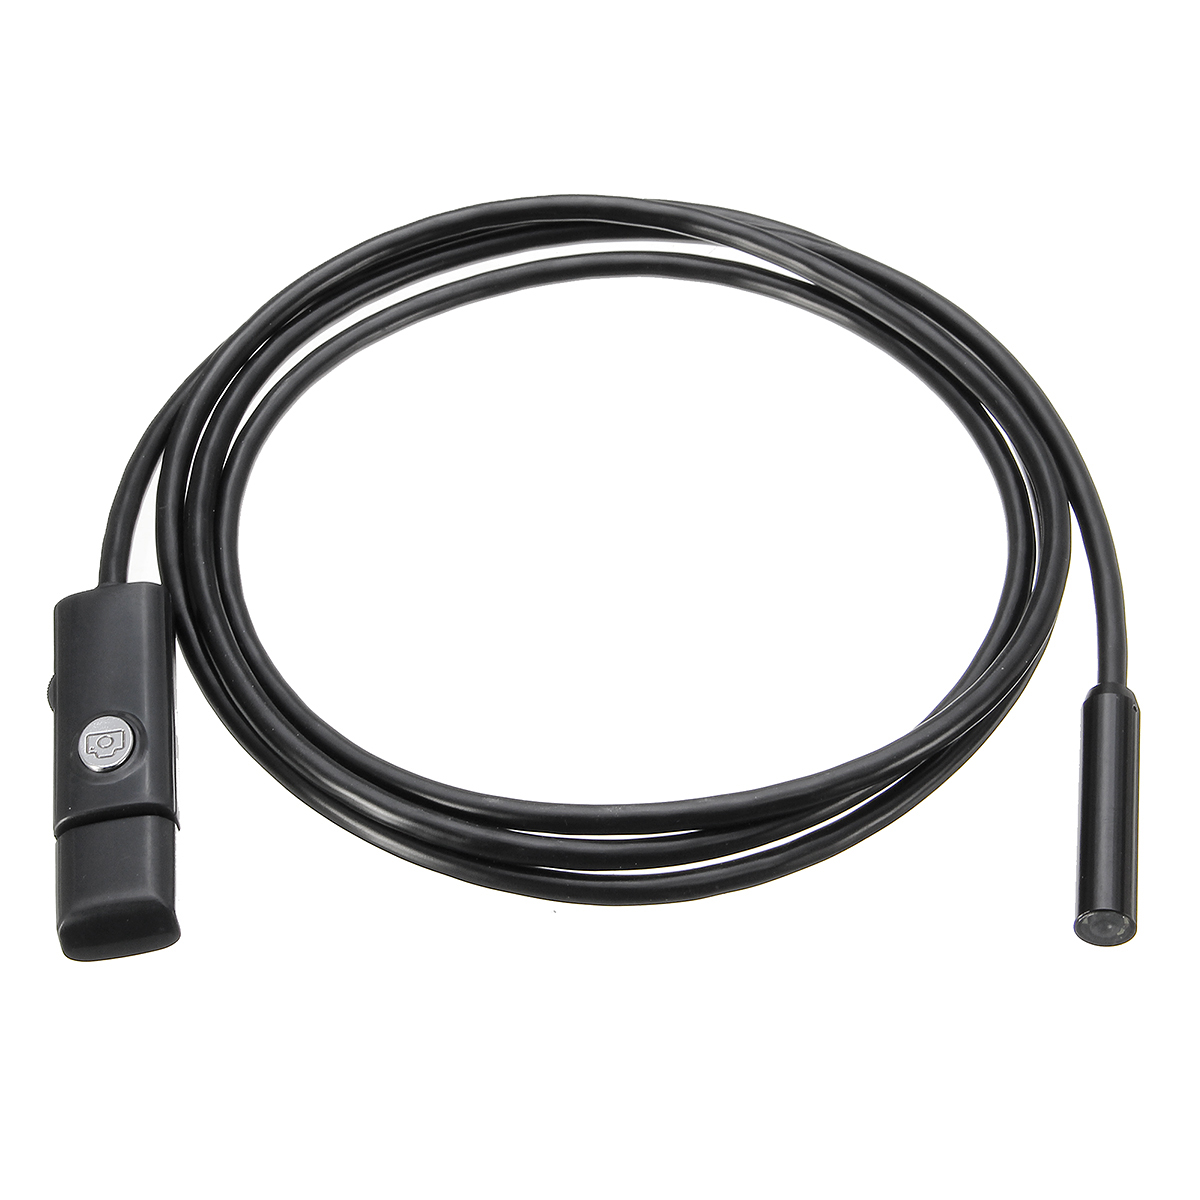 6-LED-9mm-Lens-Waterproof-IP67-USB-Wire-Borescope-Camera-Inspection-Borescope-Tube-Camera-for-Androi-1068605-2